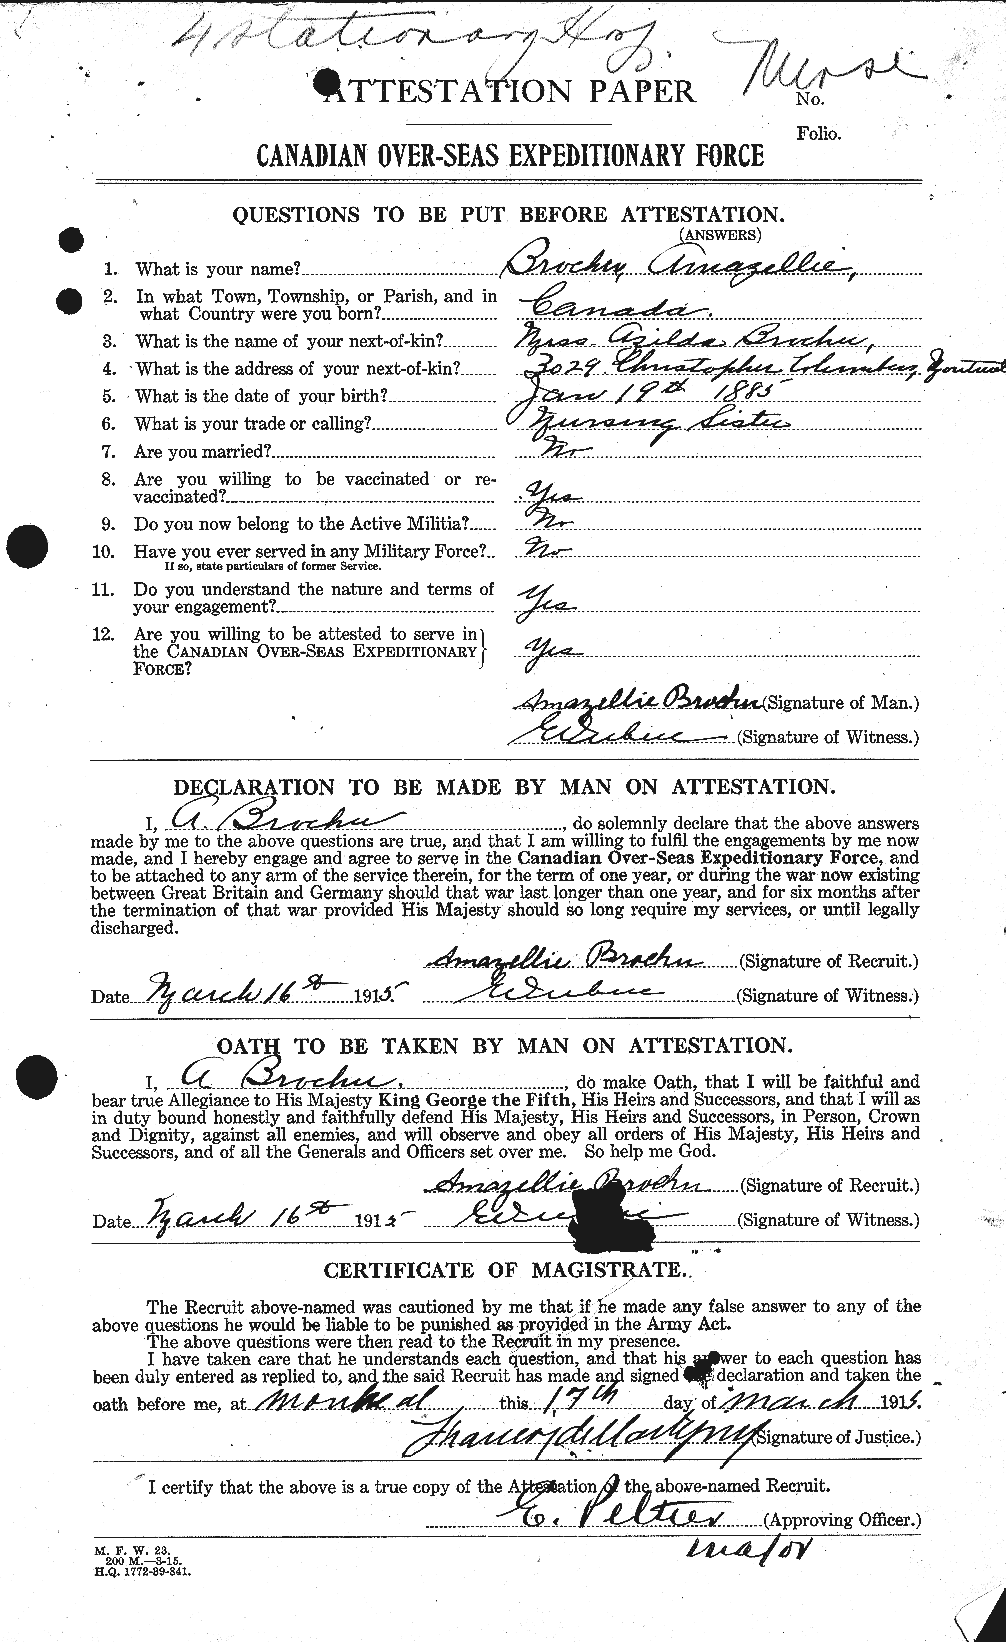 Personnel Records of the First World War - CEF 263856a